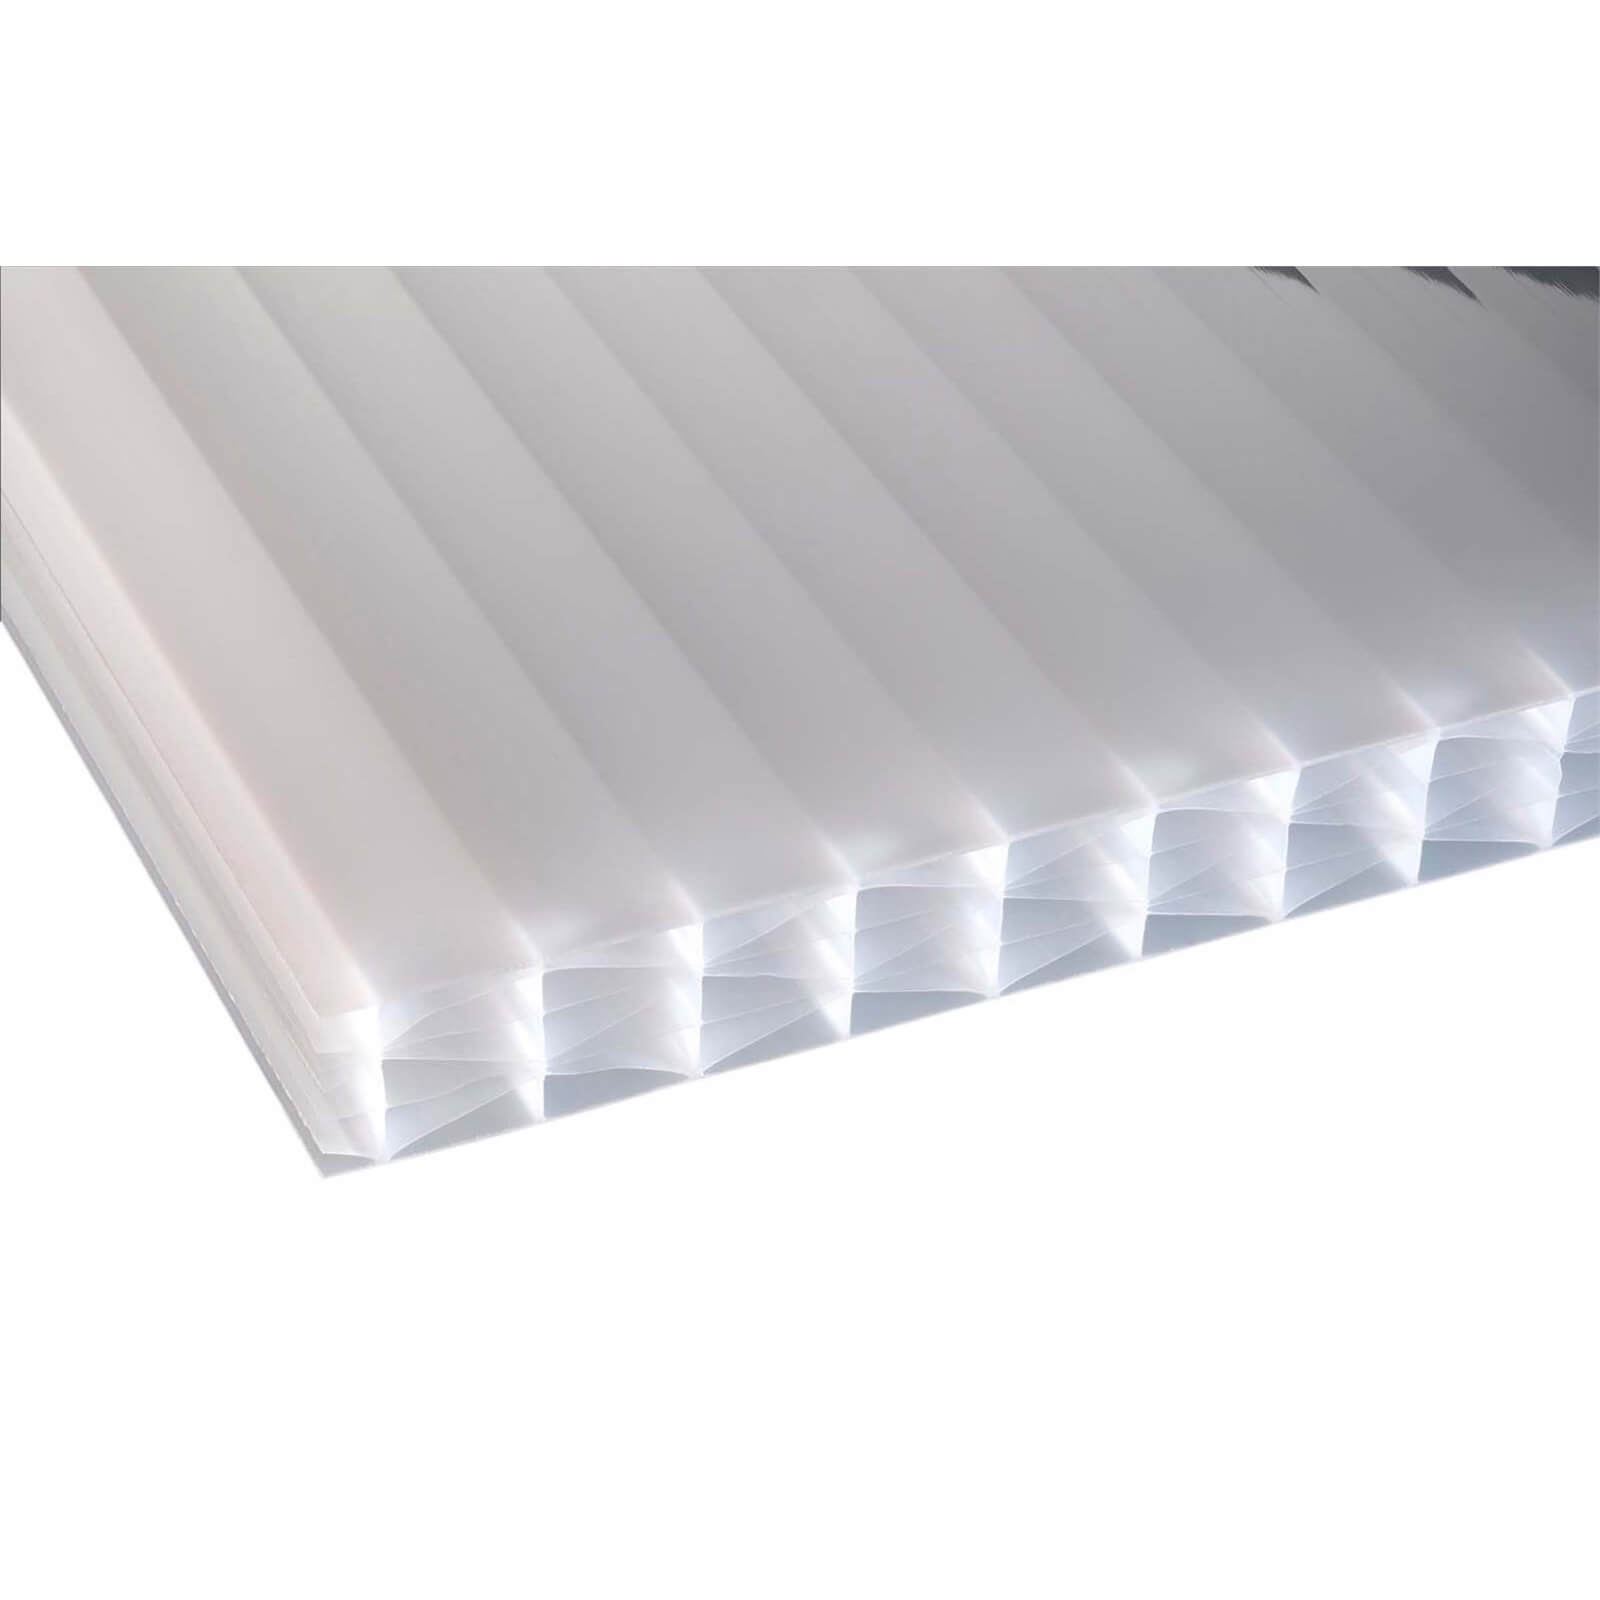 Corotherm Opal Roof Sheet 2500x700x25mm - Pack 5